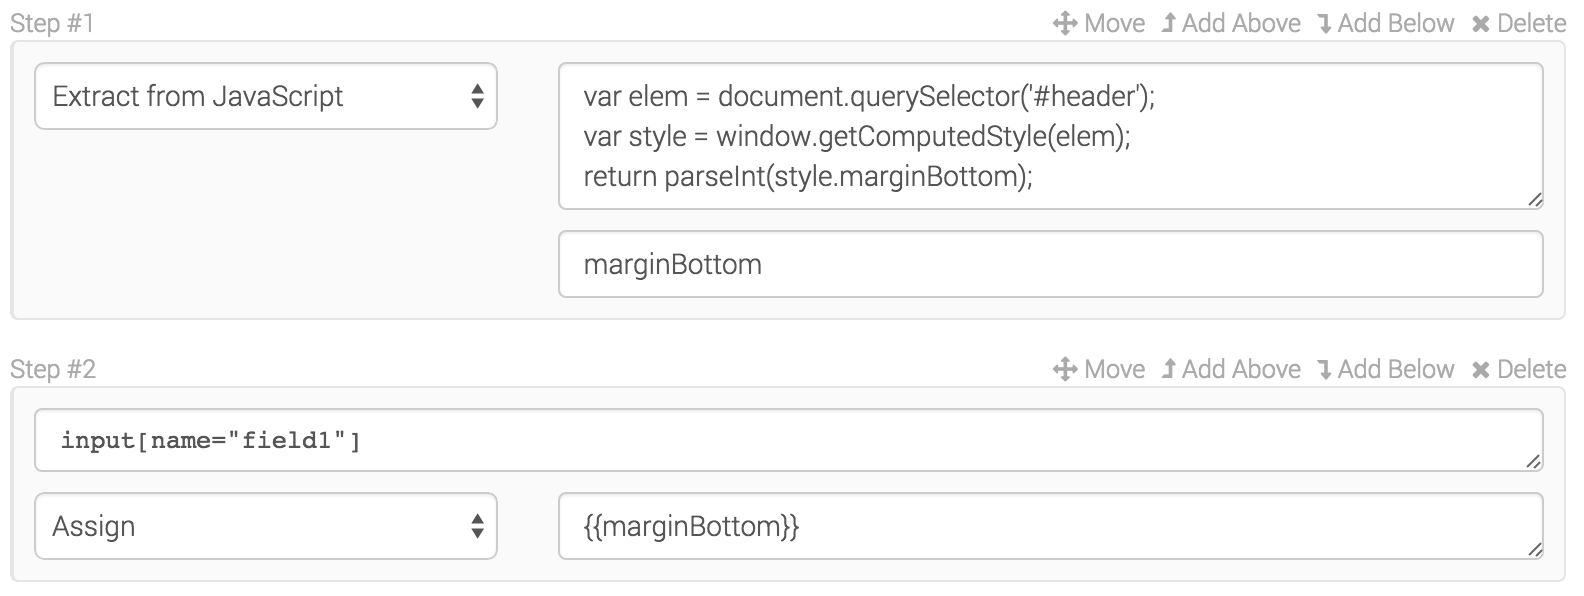 Extract from JavaScript